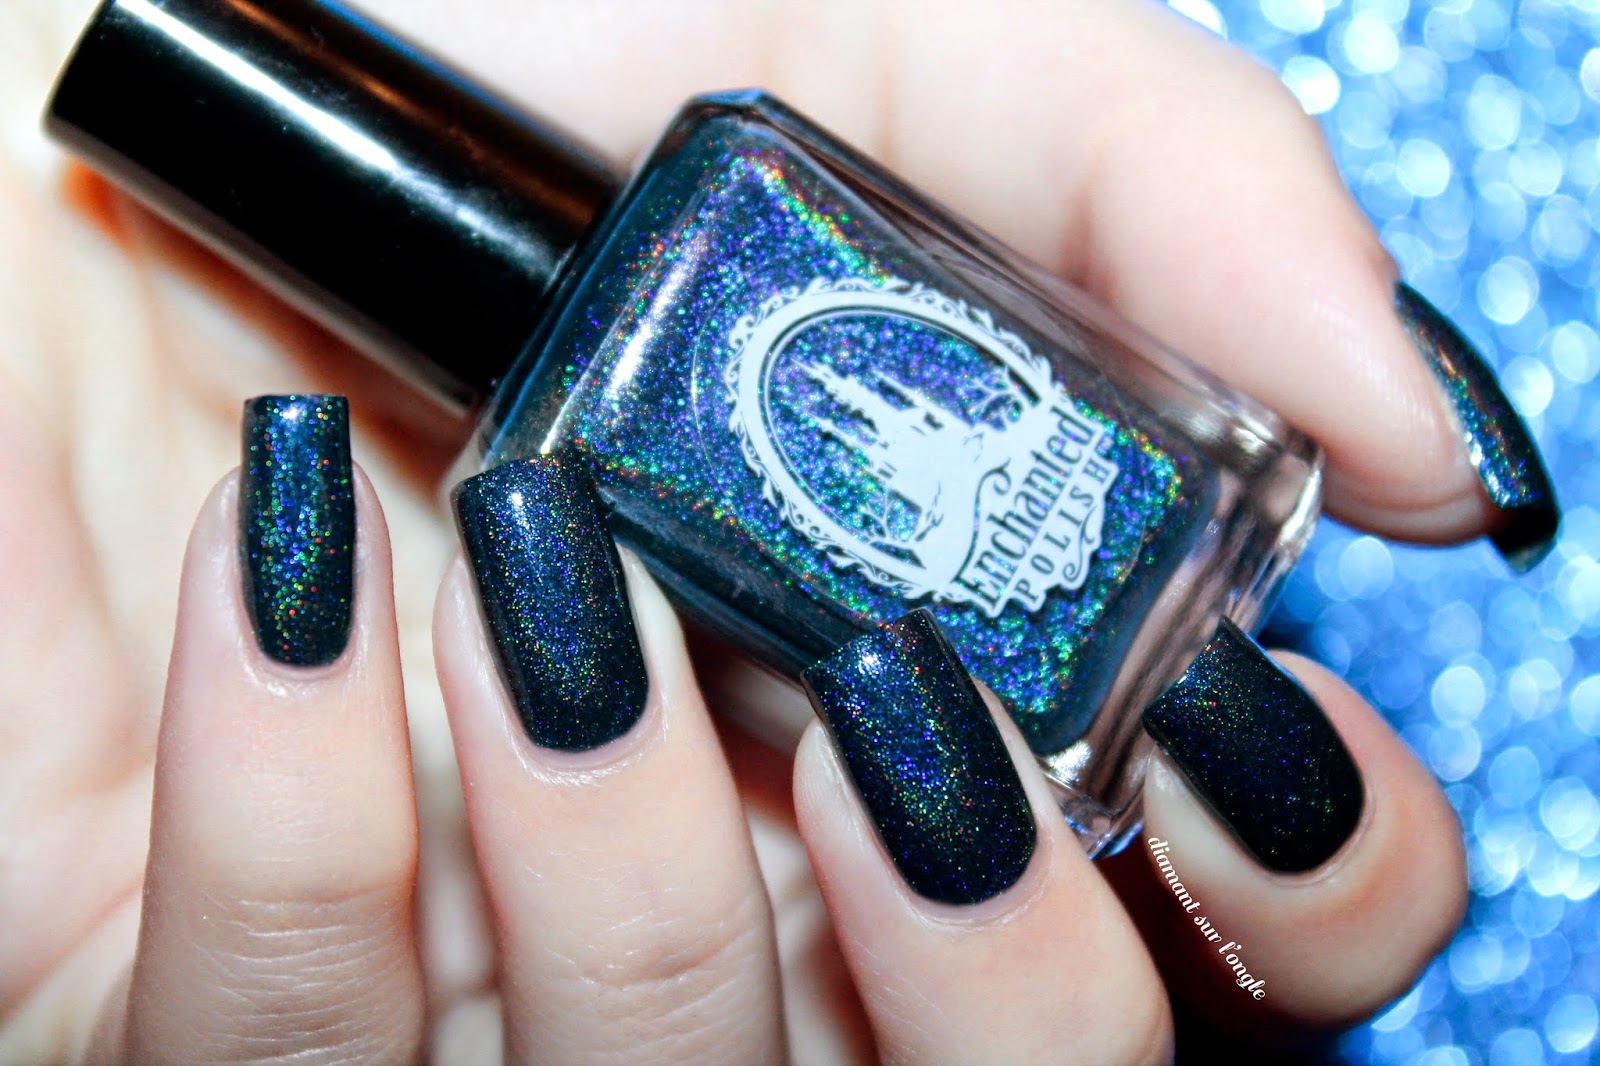 Swatch of January 2014 by Enchanted Polish